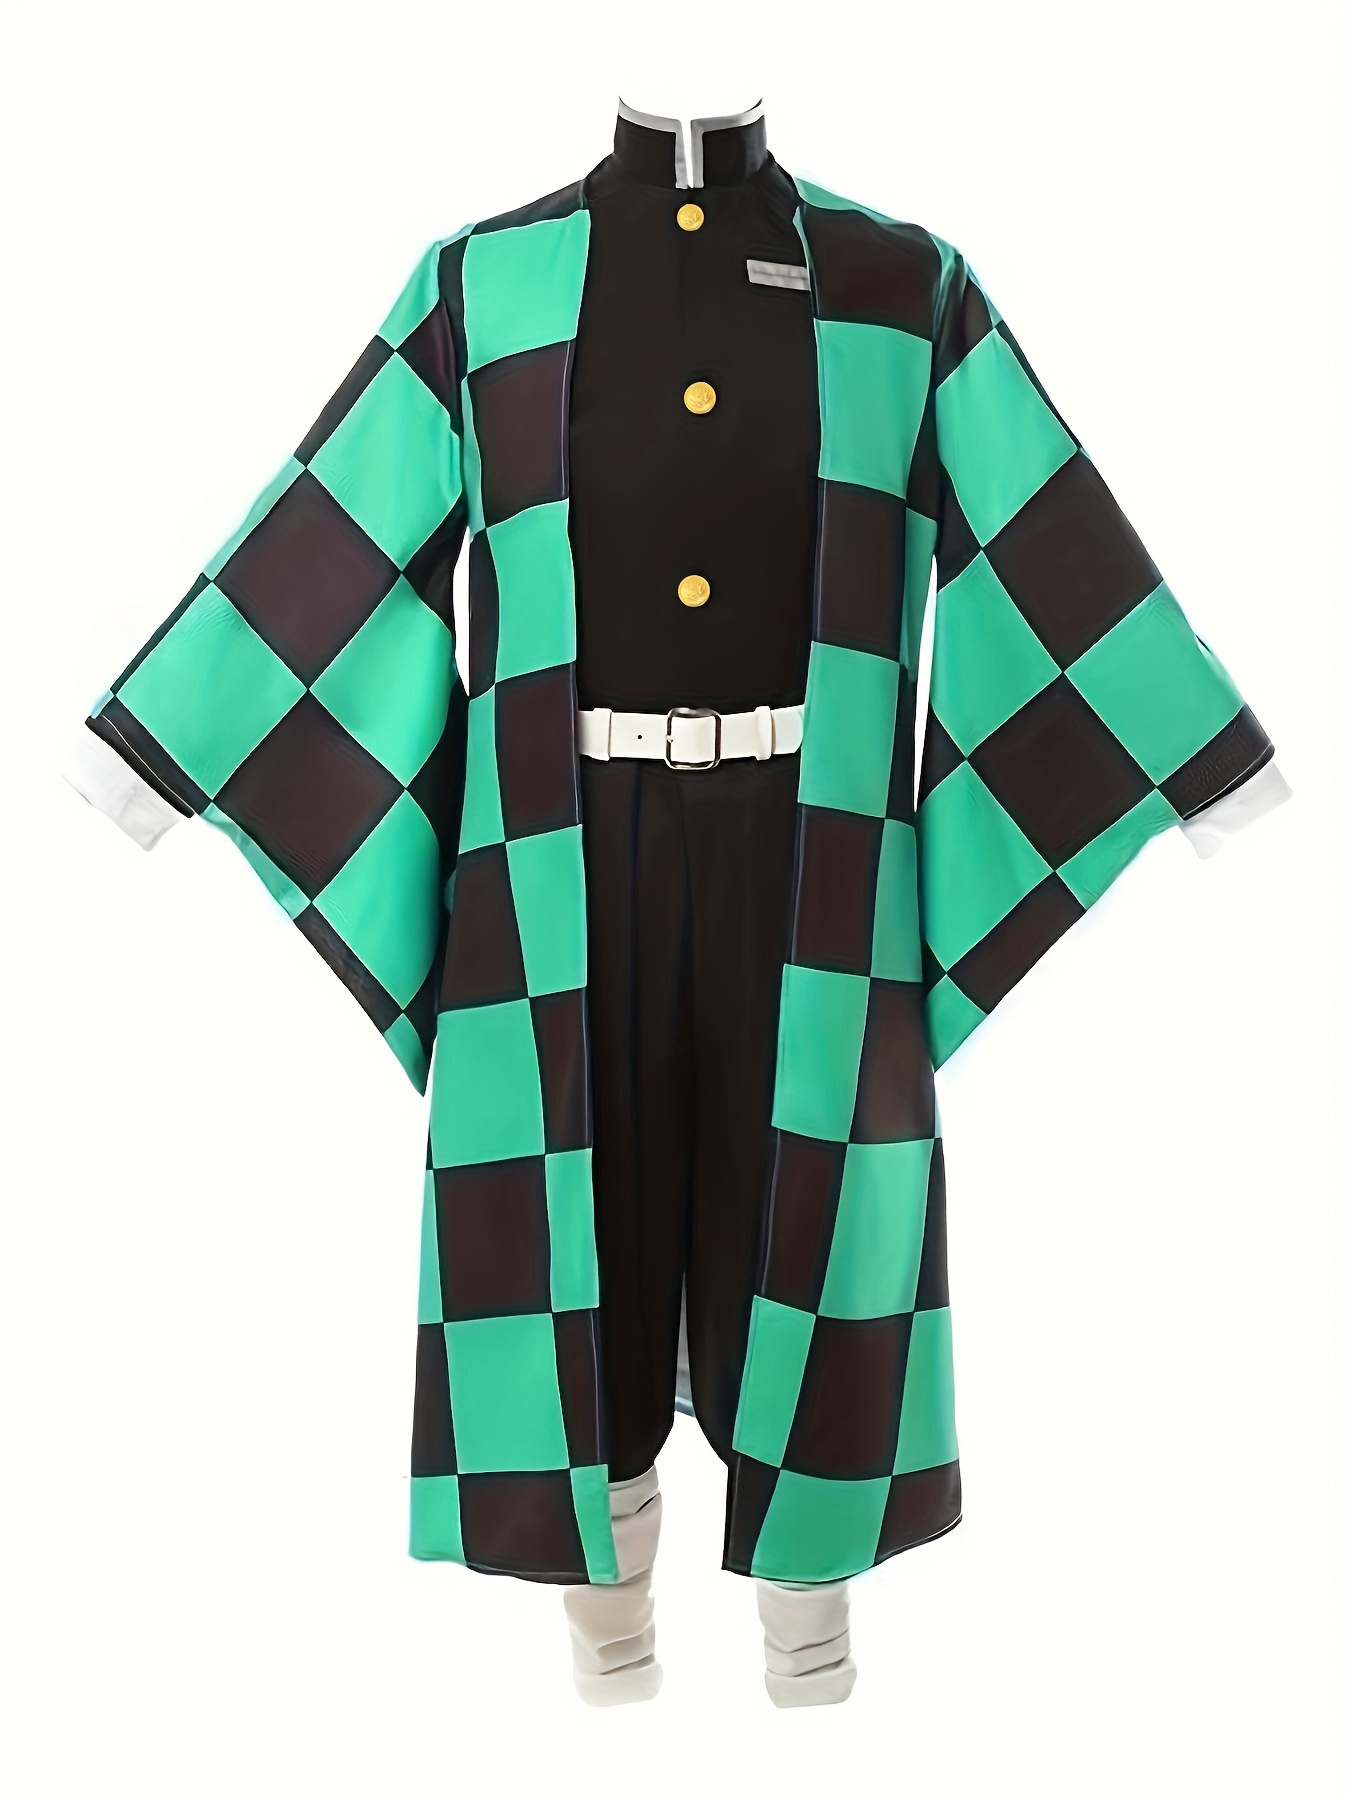 Anime Character Cosplay Costume, Anime Clothes Uniform Set for Halloween Party Cosplay, Kid Boy's Novelty Clothes,Polyester,Green,$22.89,140,Temu